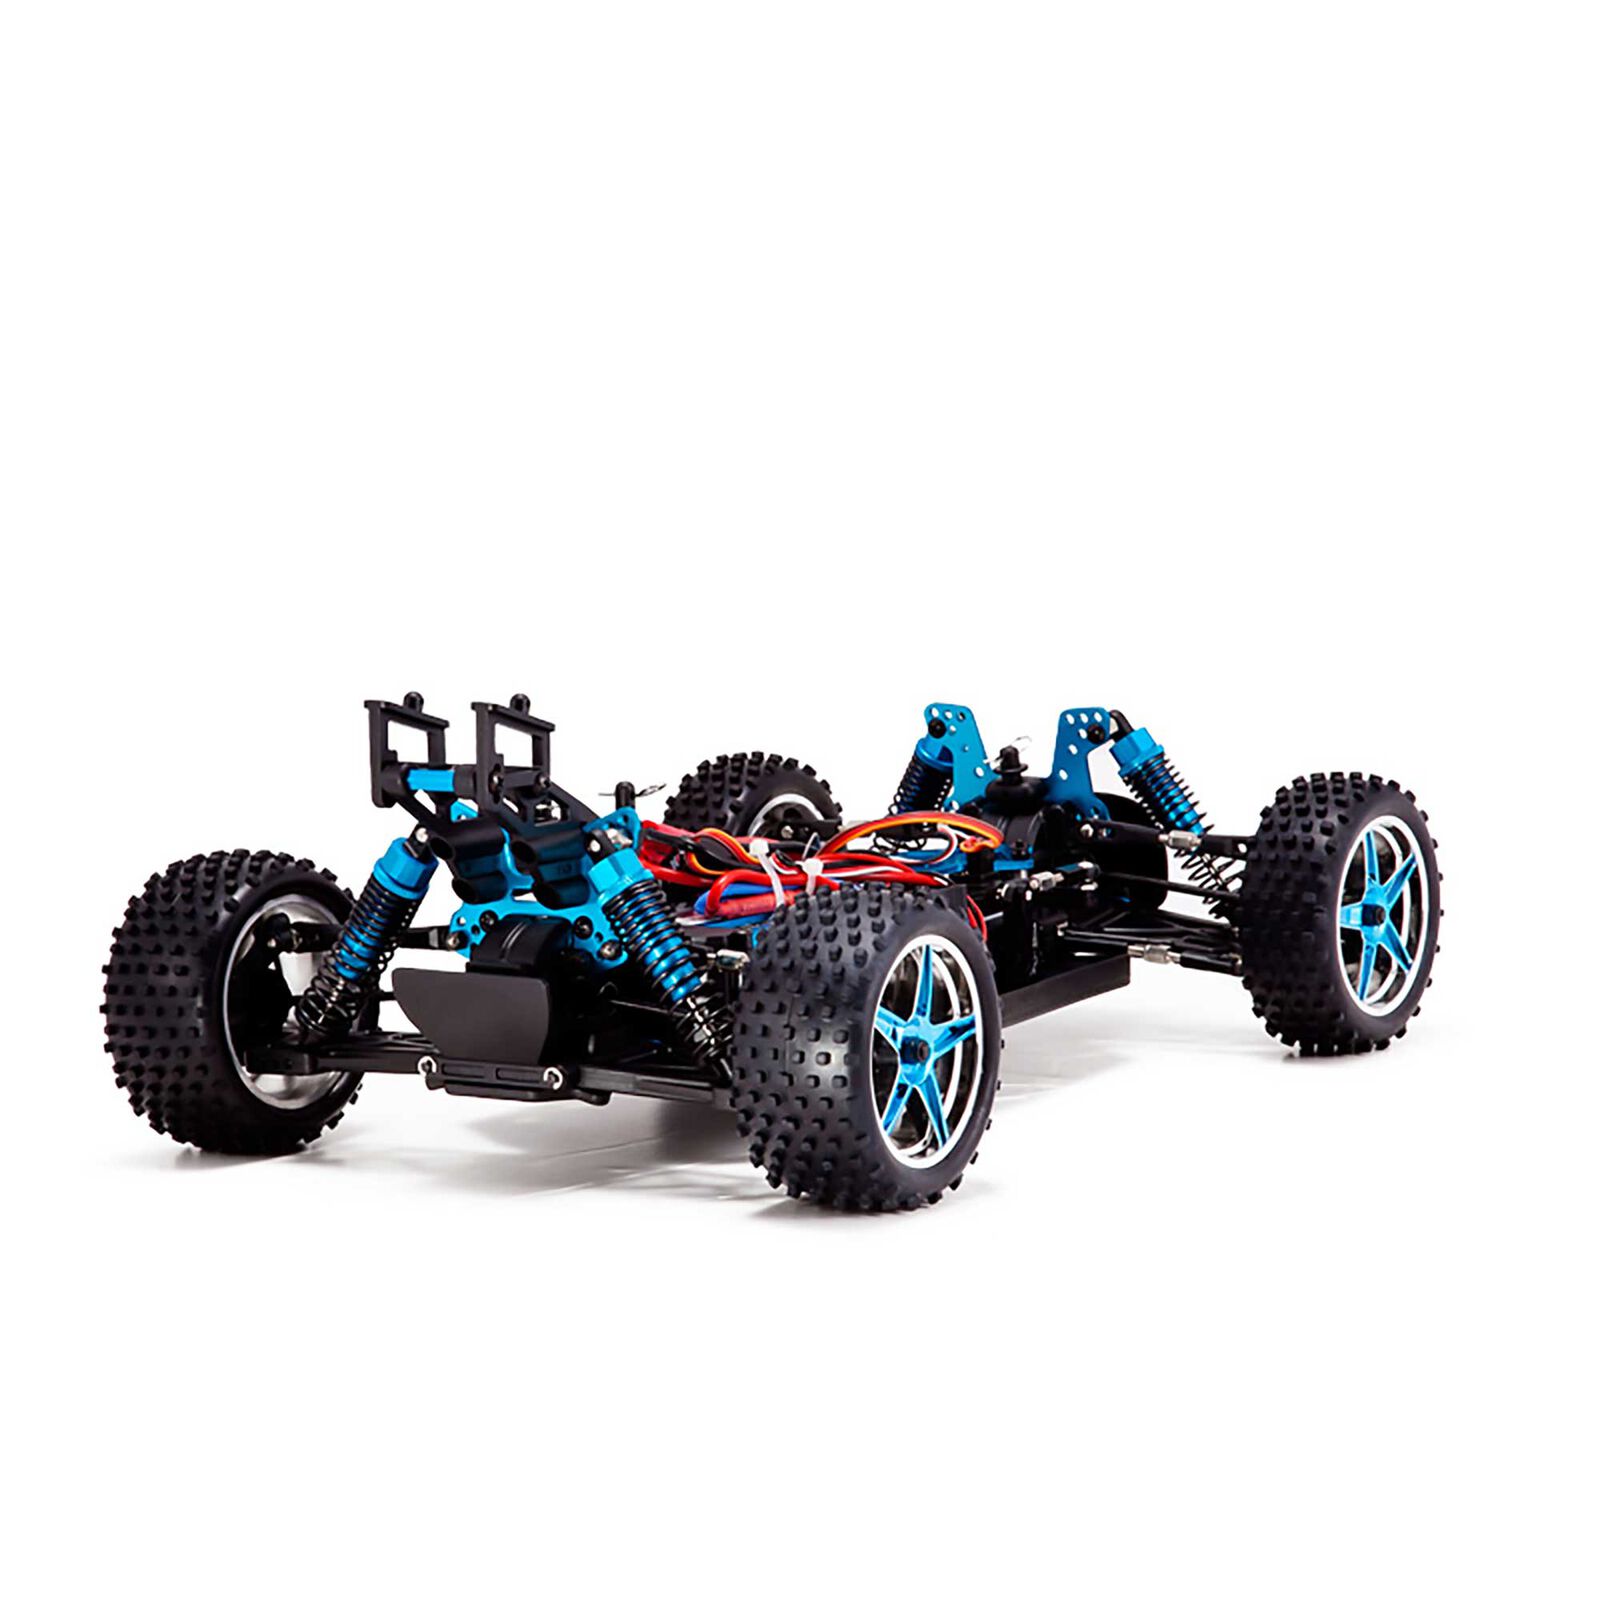 1/10 Redcat Brushless RC Buggy TORNADO EPX PRO LIPO Battery BLUE/SILVER